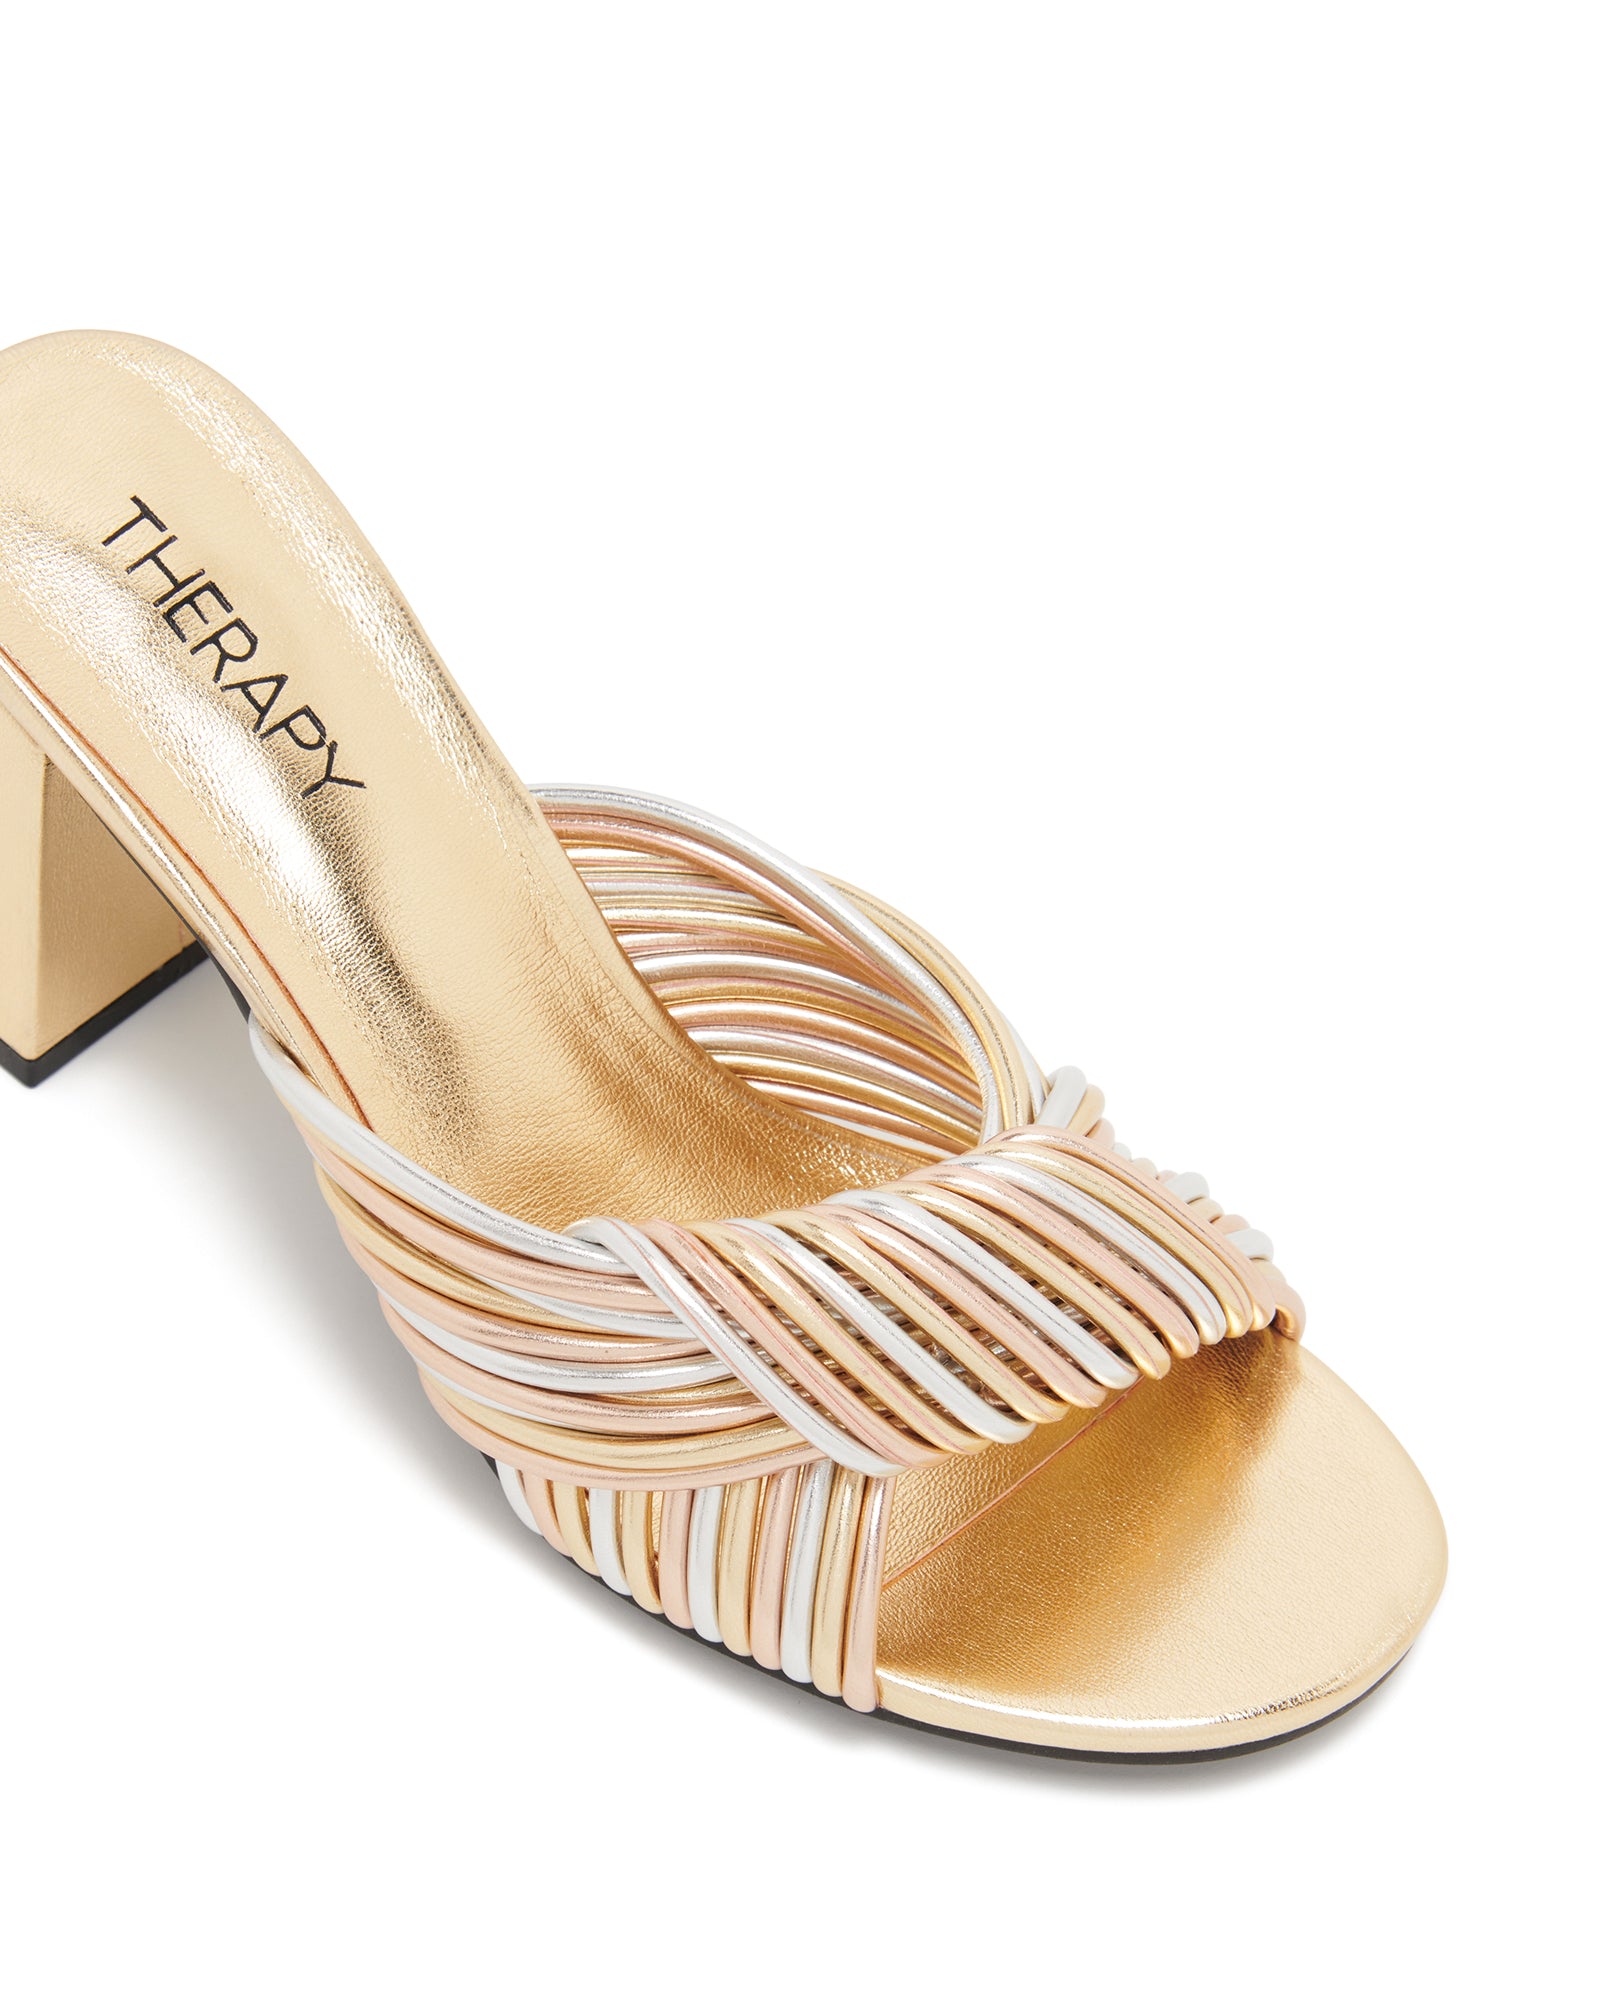 Therapy Shoes Kaylee Gold Metallic | Women's Heels | Sandals | Mules